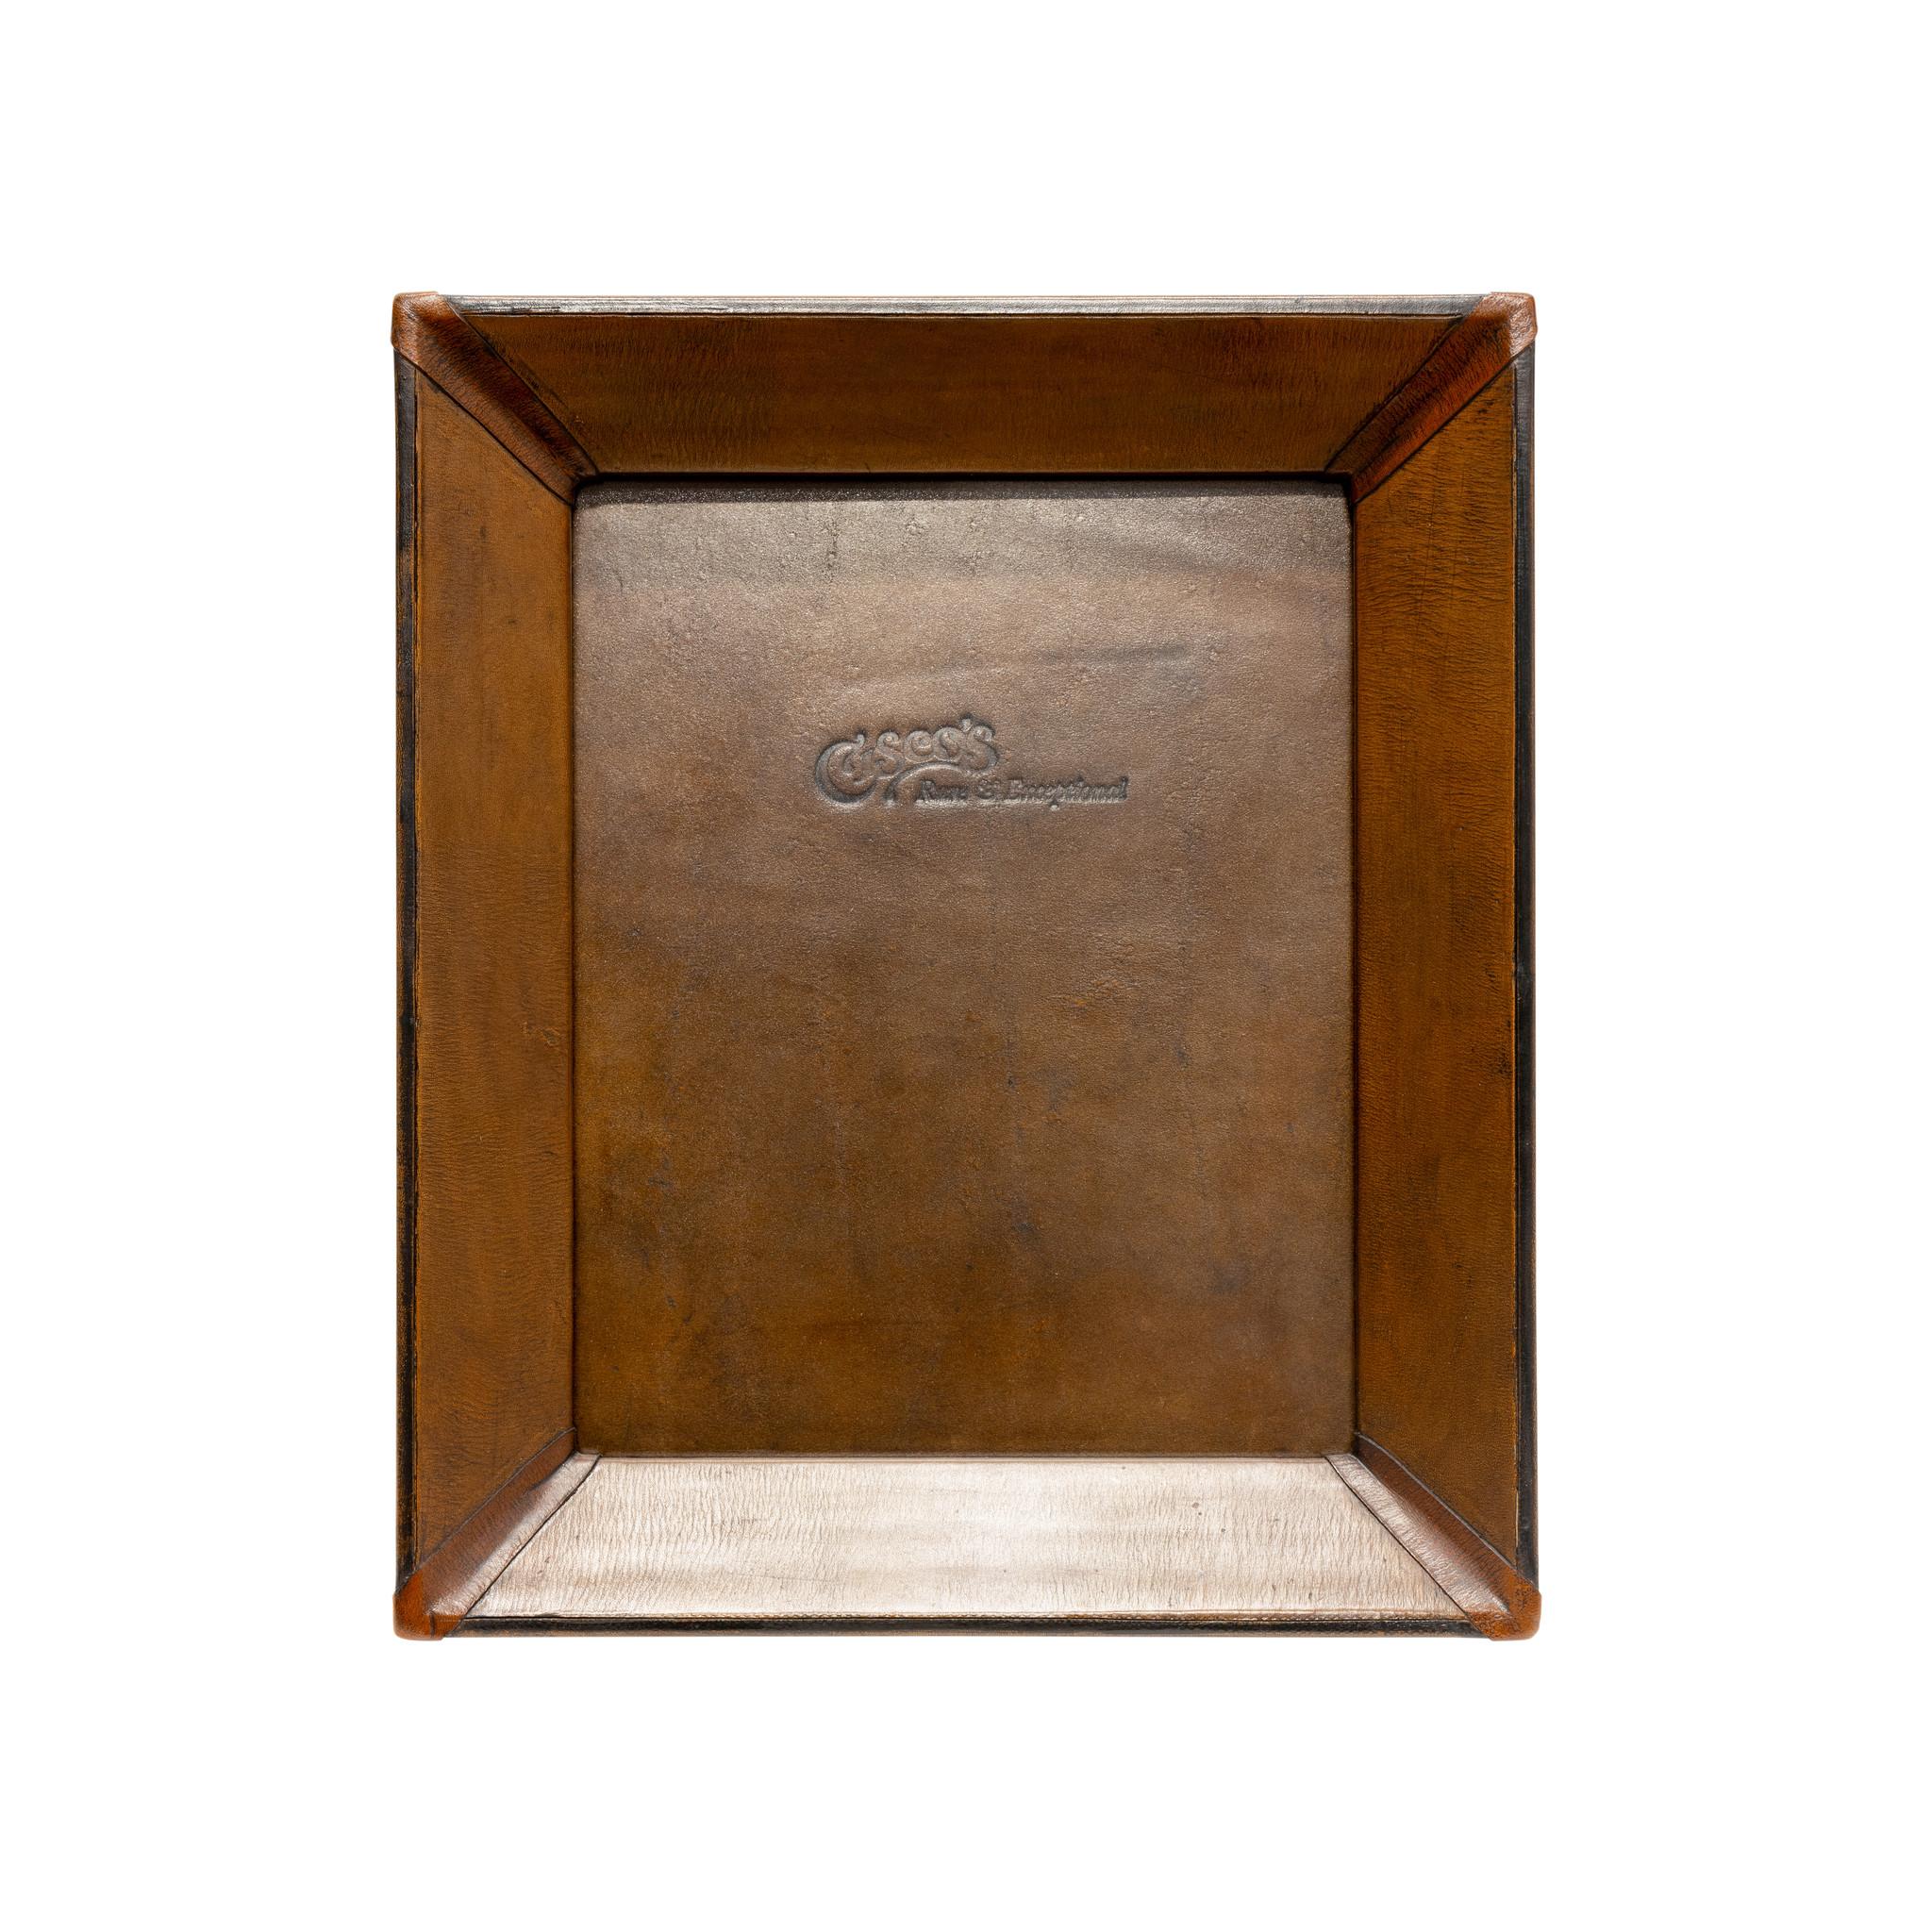 8x10 medium brown & black leather tabletop picture frame. Premium leather picture frames add the perfect accent to any home or office. Each frame is skillfully crafted by artisan saddle makers using genuine cowhide. Color: Medium brown with